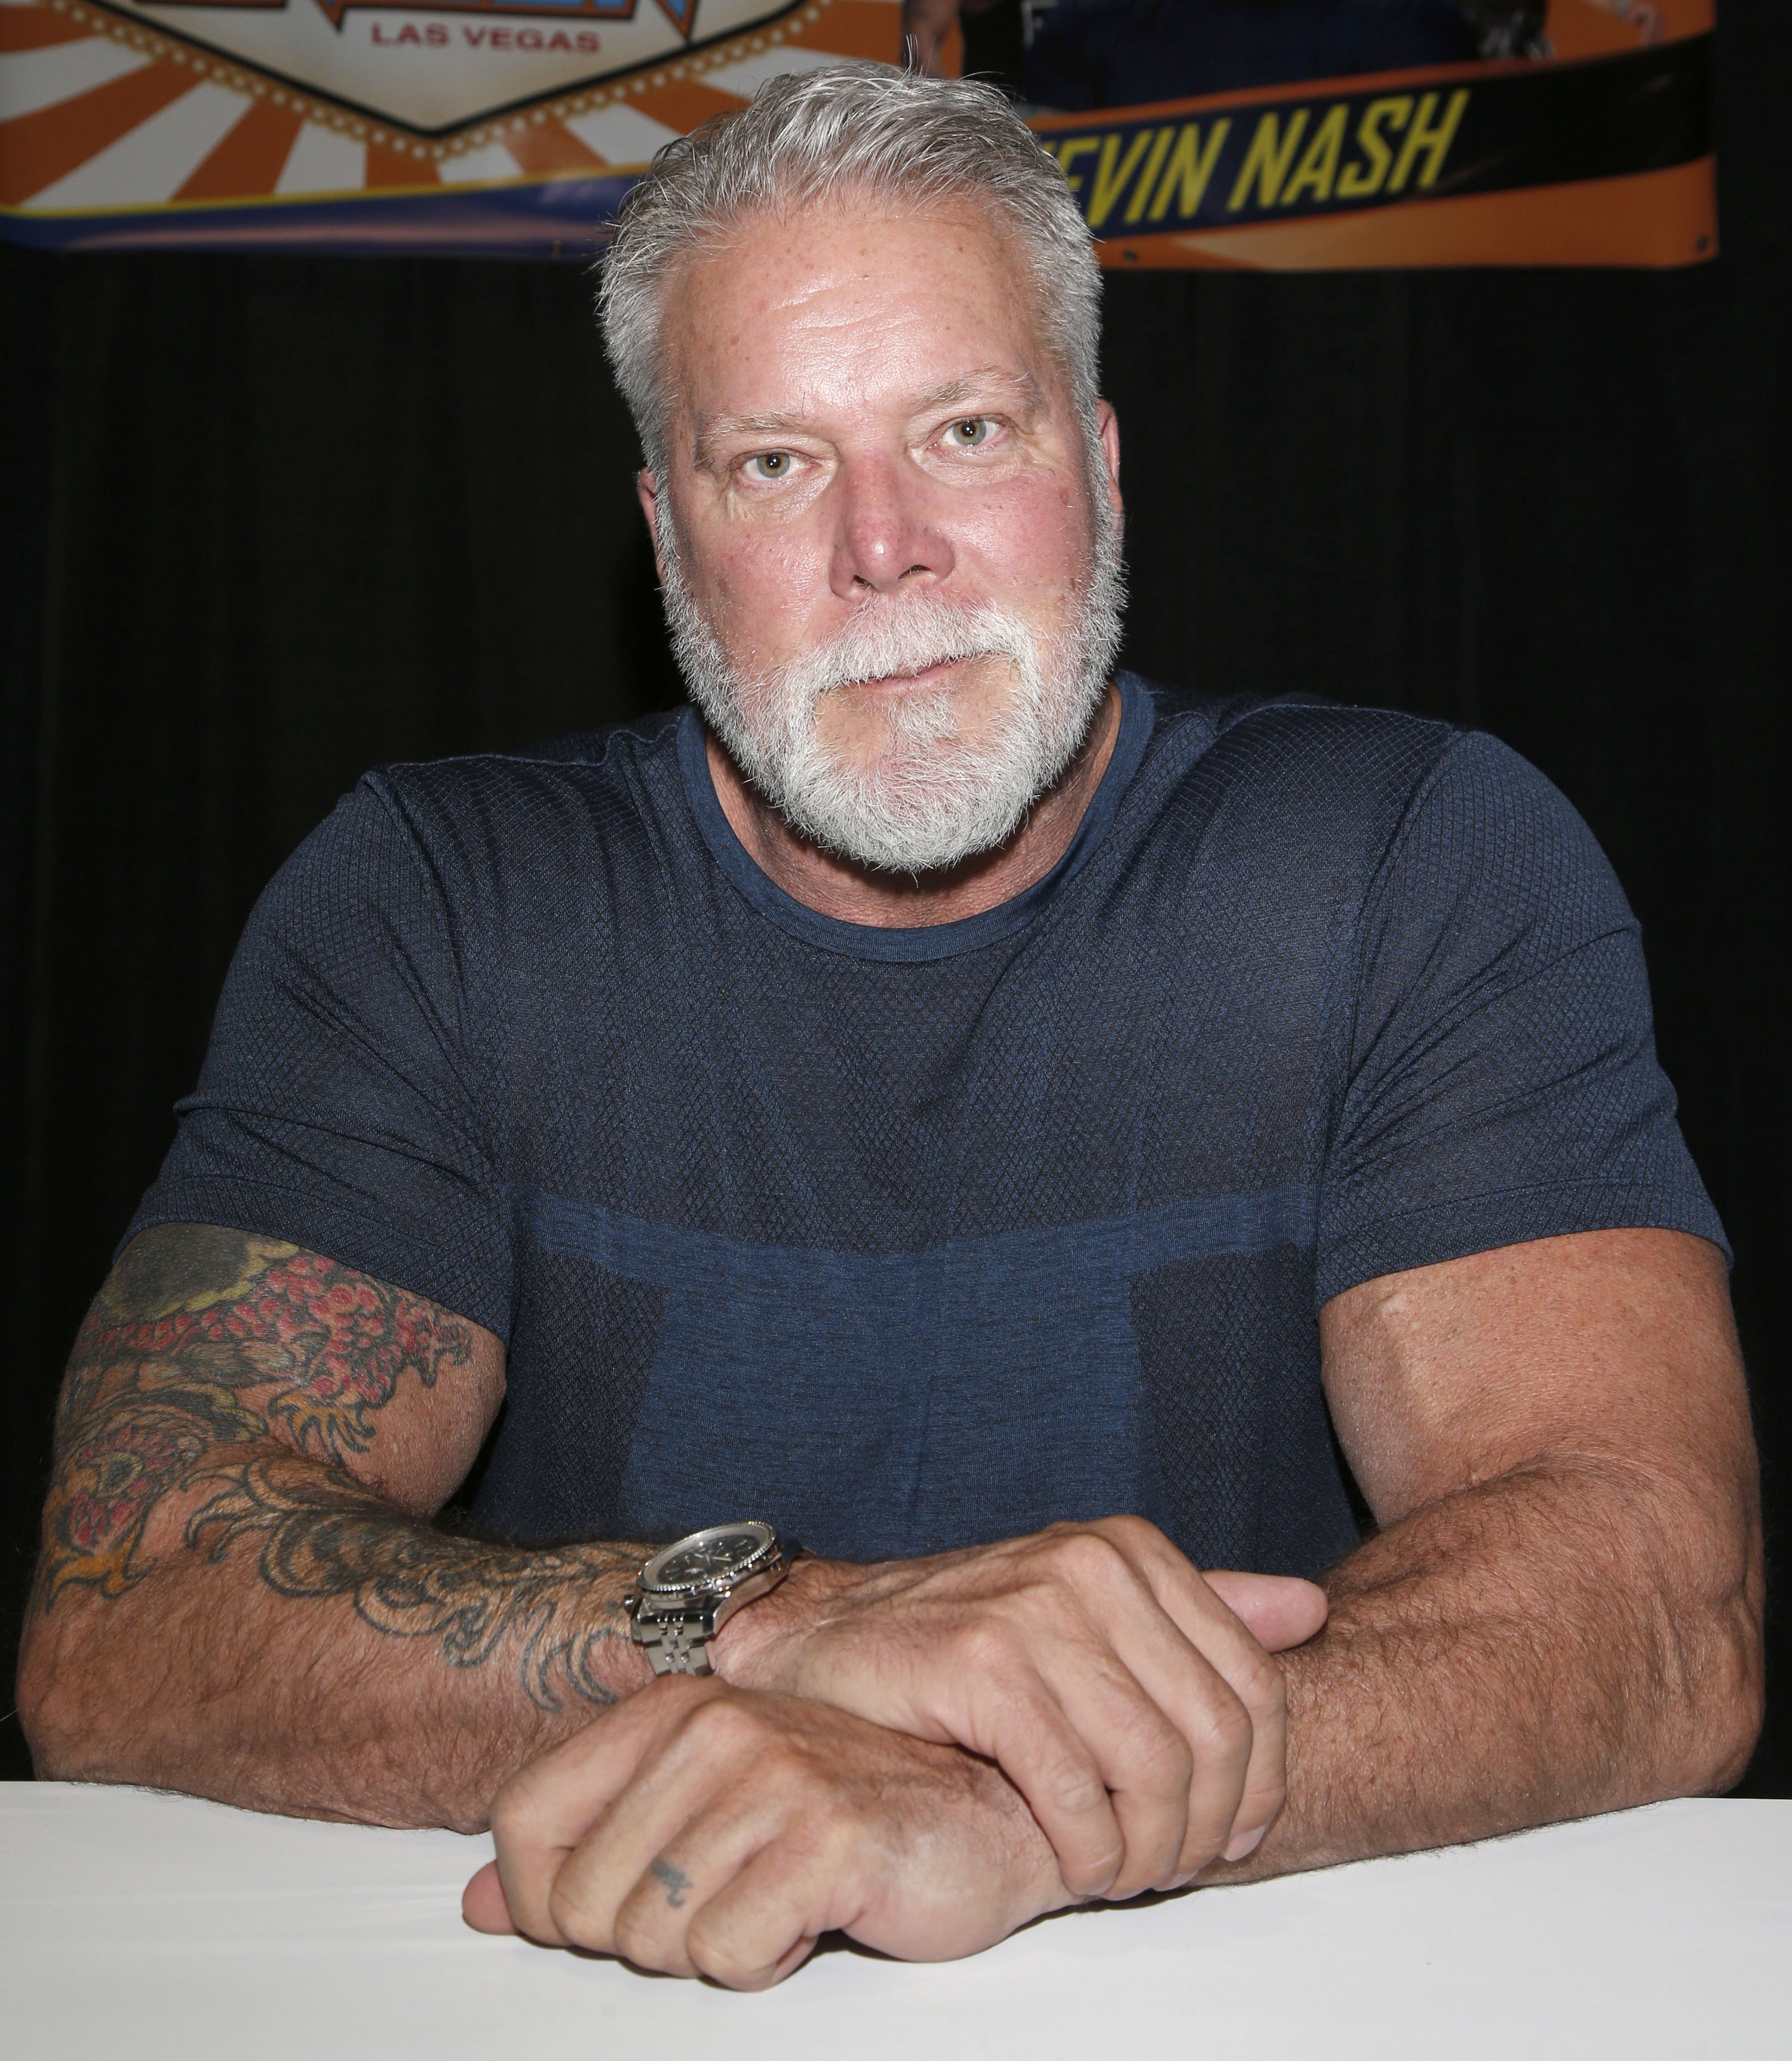 Kevin Nash at an event